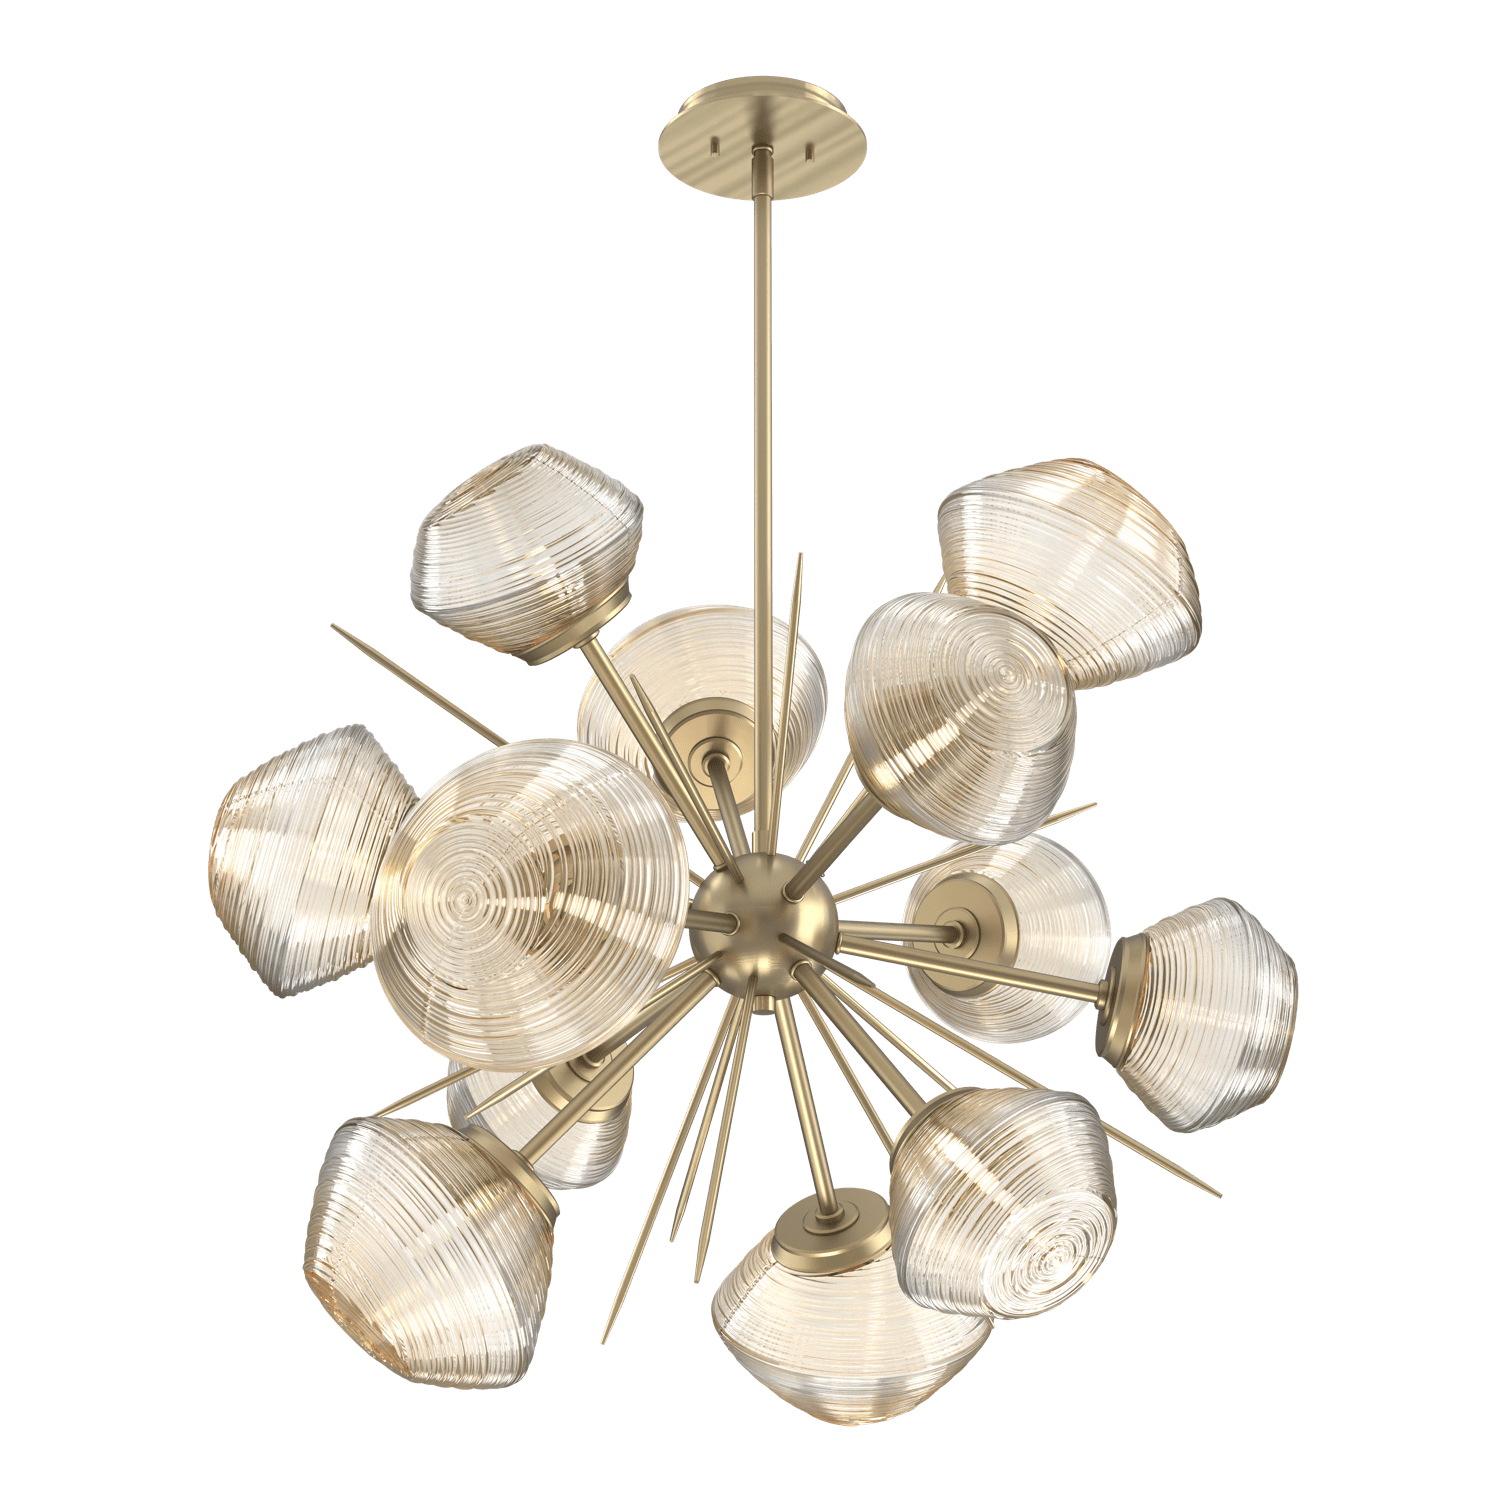 CHB0089-0G-HB-A-Hammerton-Studio-Mesa-36-inch-starburst-chandelier-with-heritage-brass-finish-and-amber-blown-glass-shades-and-LED-lamping